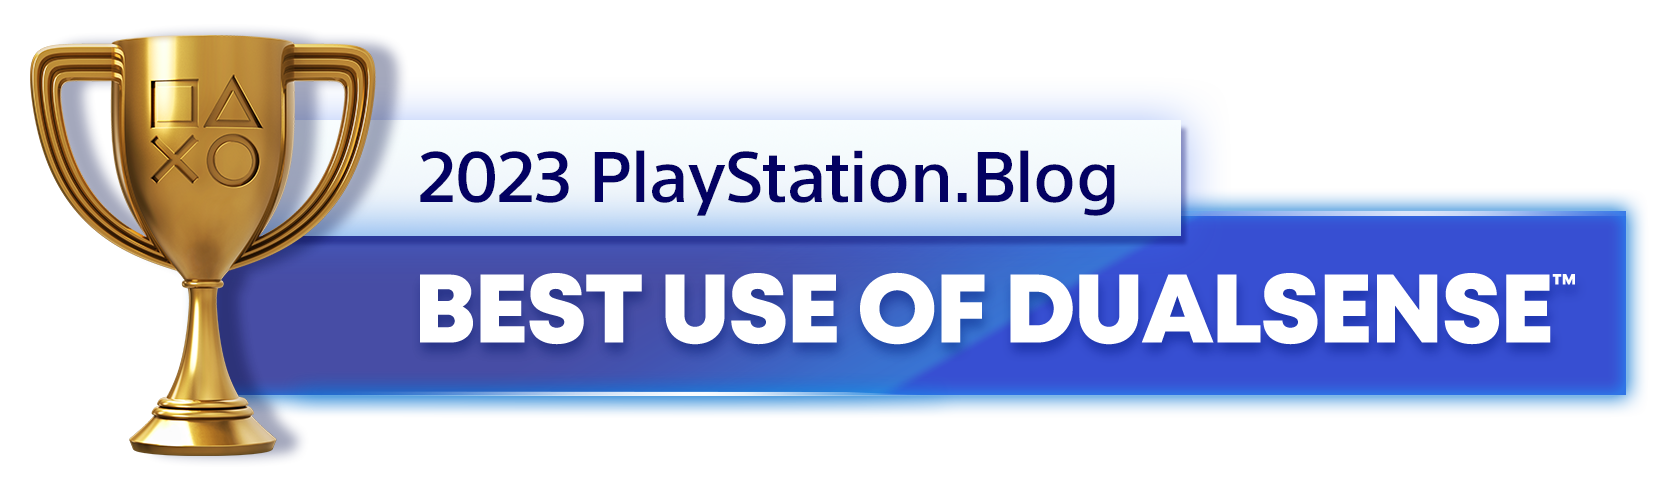  "Gold Trophy for the 2023 PlayStation Blog Best Use of DualSense Controller Winner"